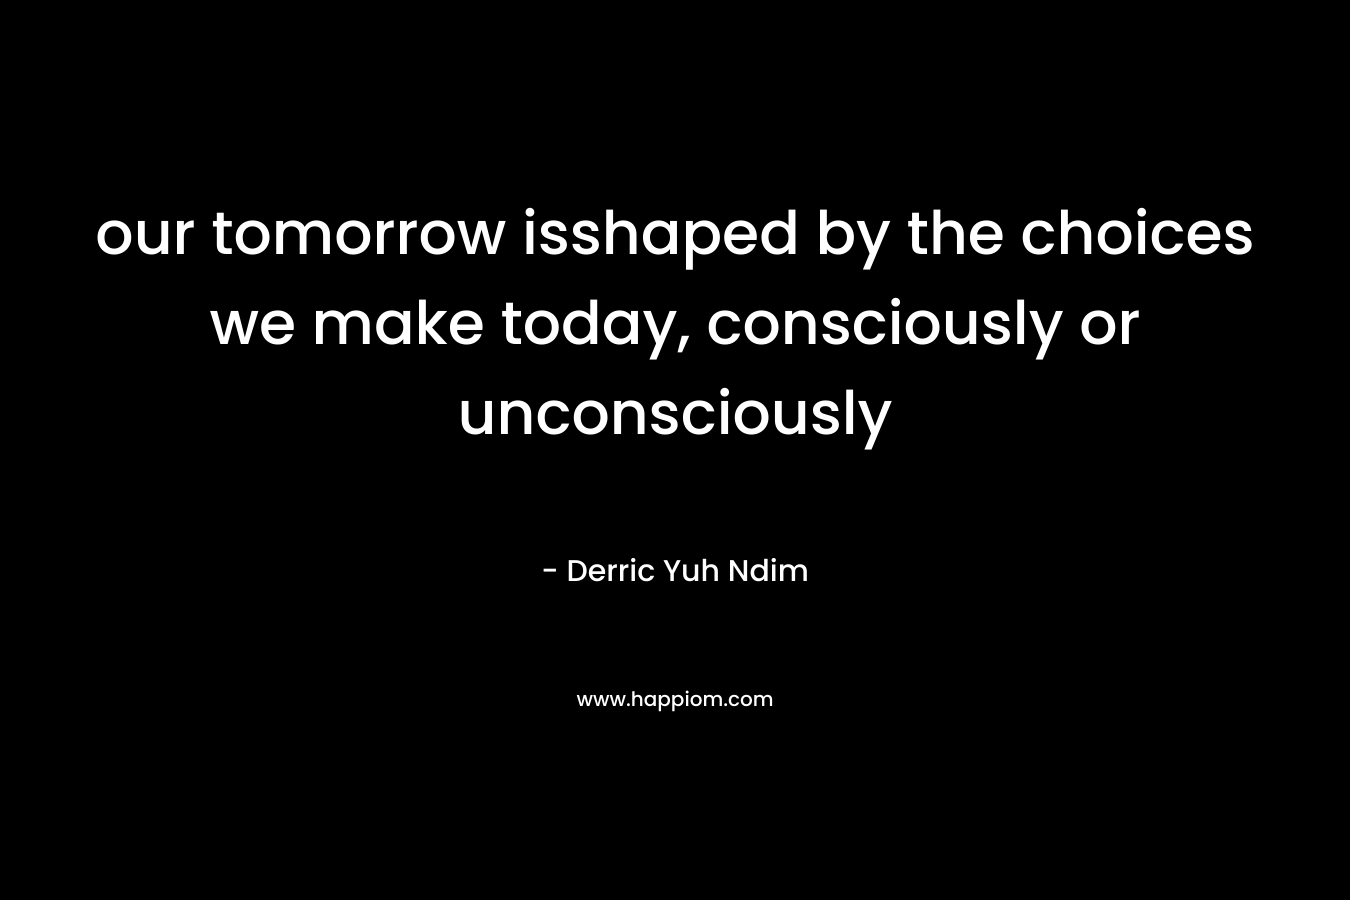 our tomorrow isshaped by the choices we make today, consciously or unconsciously